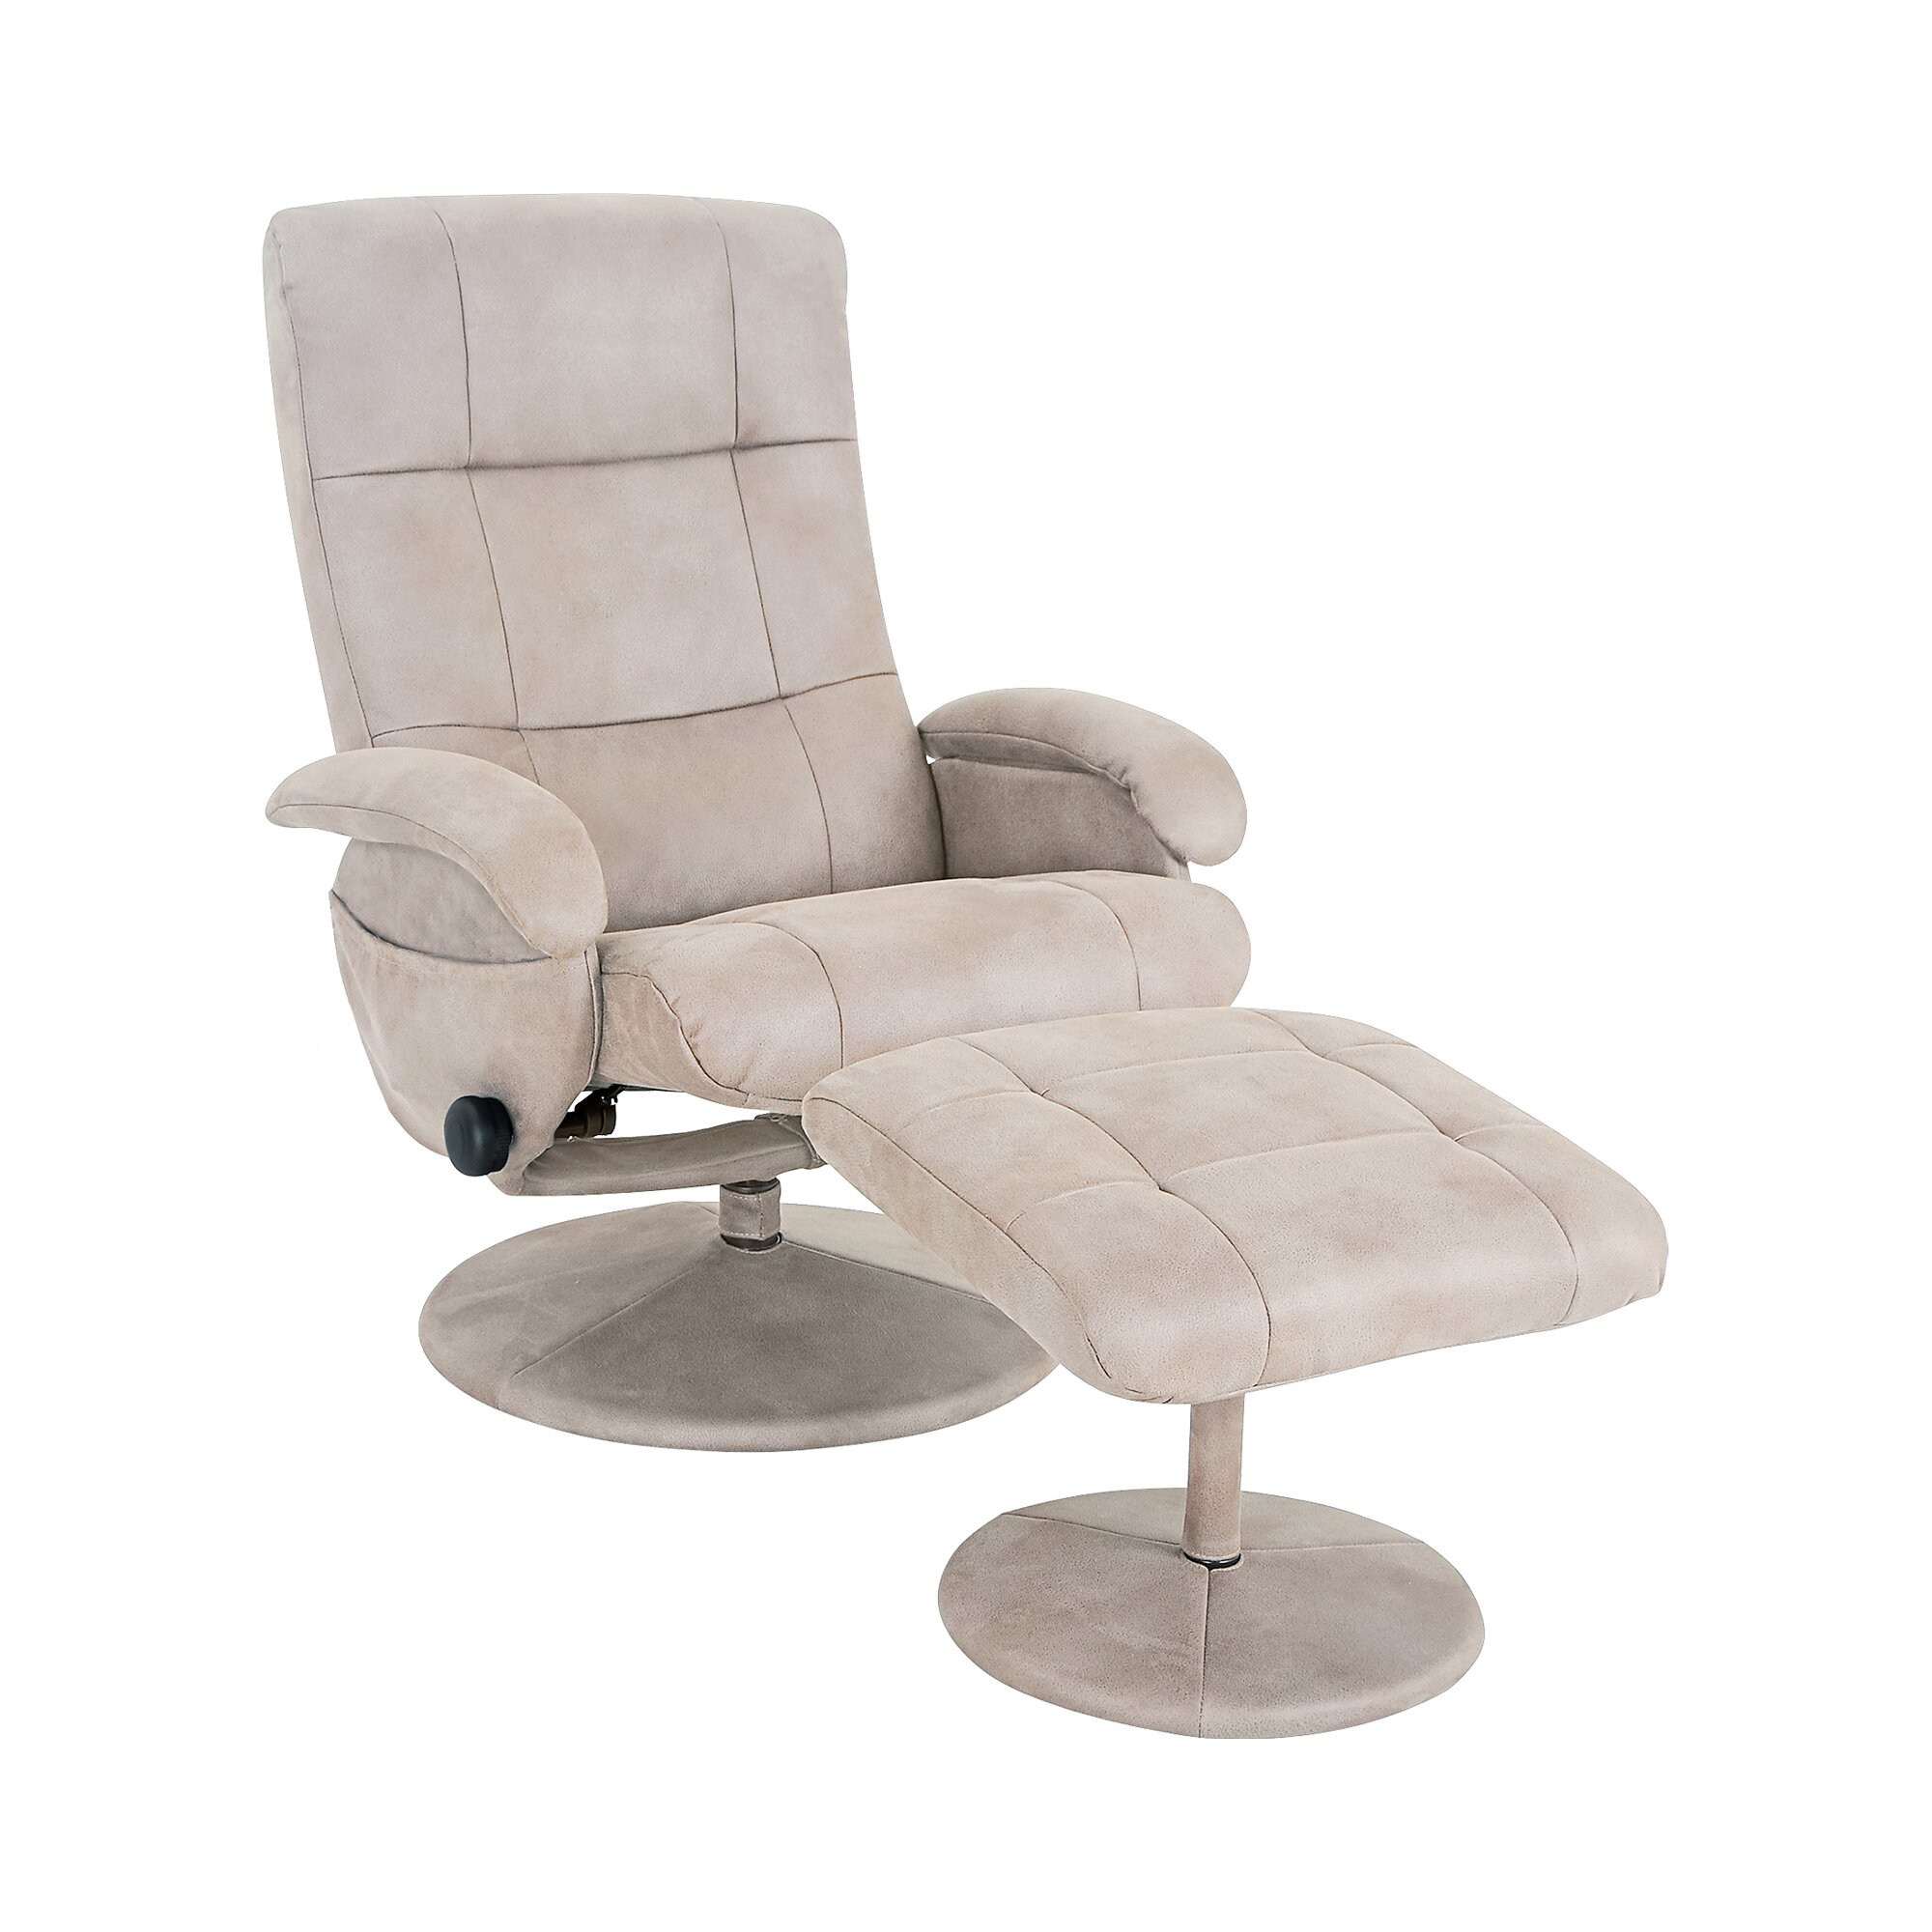 Image of Massagesessel "Relax", beige